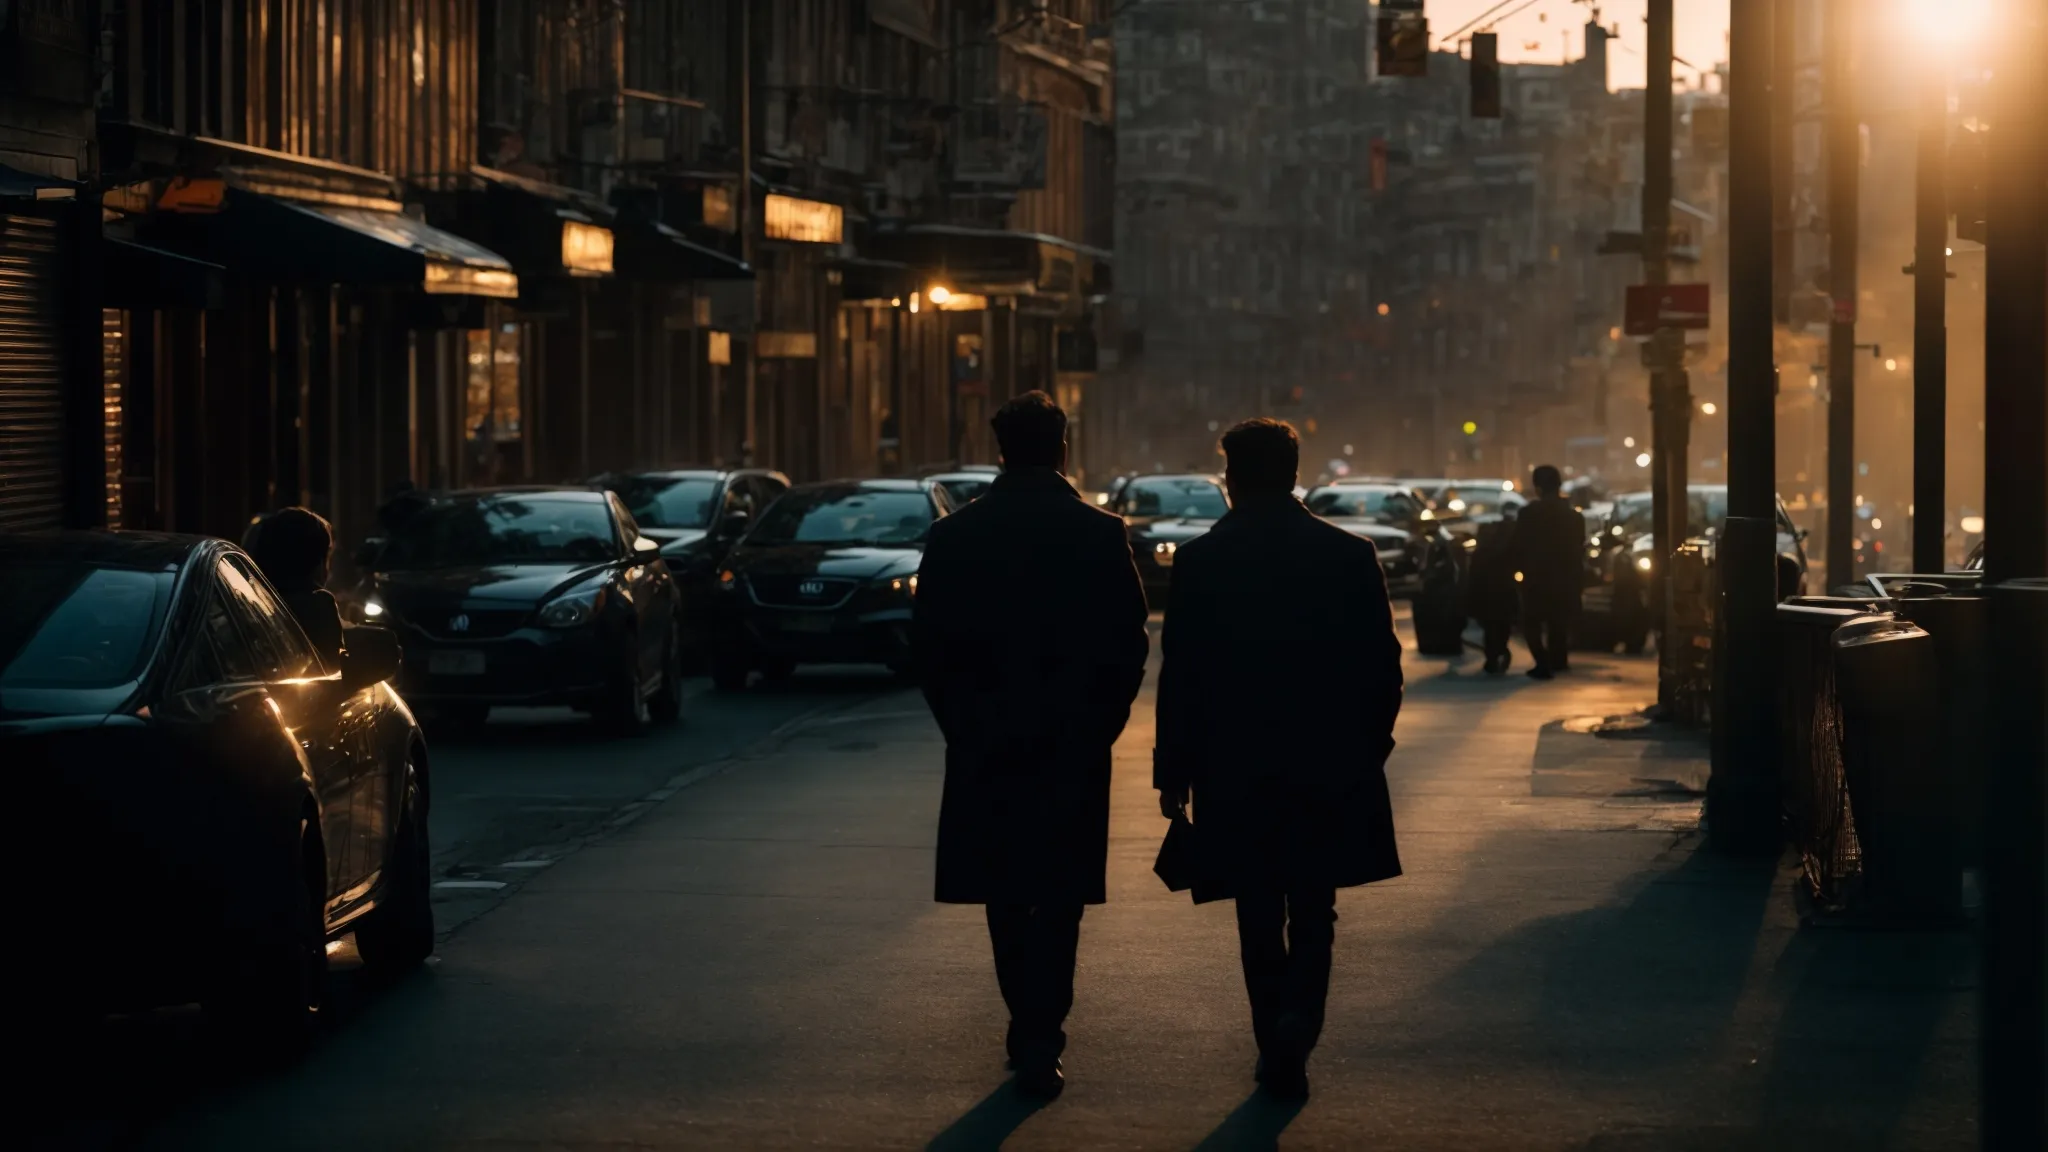 two silhouetted figures engage in an intense conversation along a bustling city street at dusk.